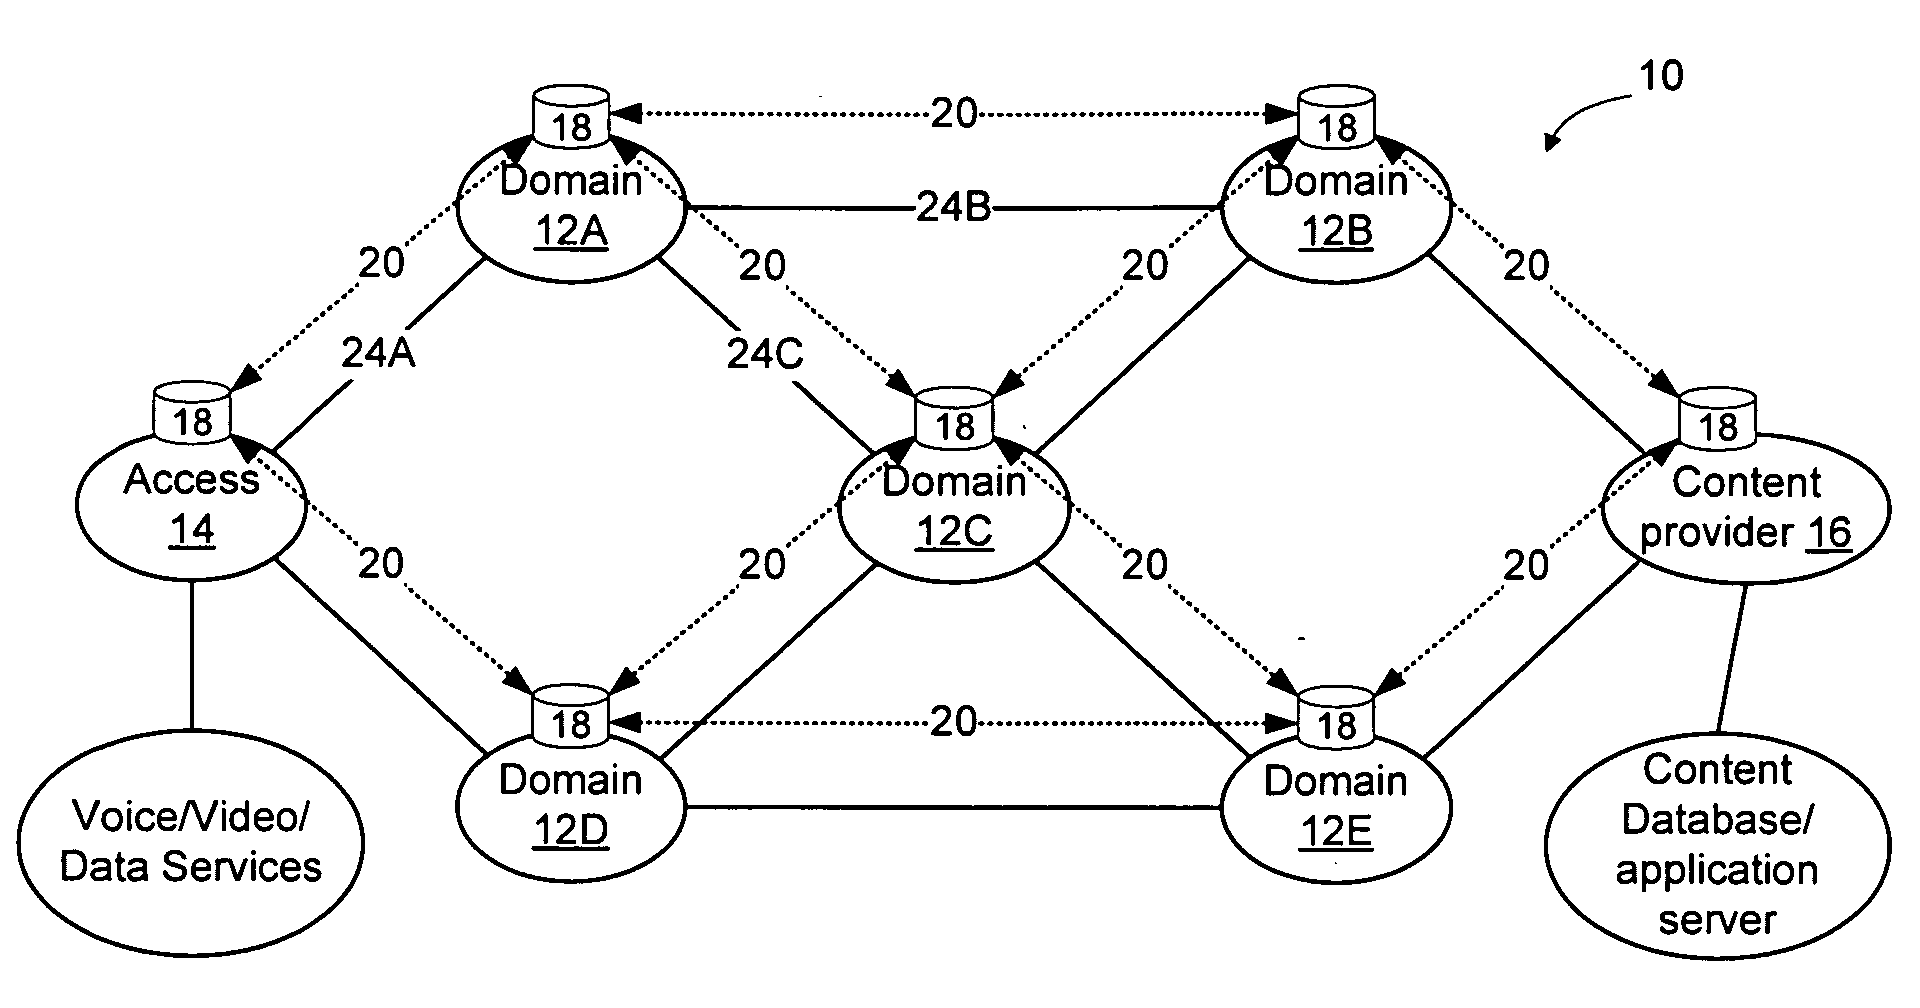 Method and apparatus for discovering, negotiating, and provisioning end-to-end SLAs between multiple service provider domains